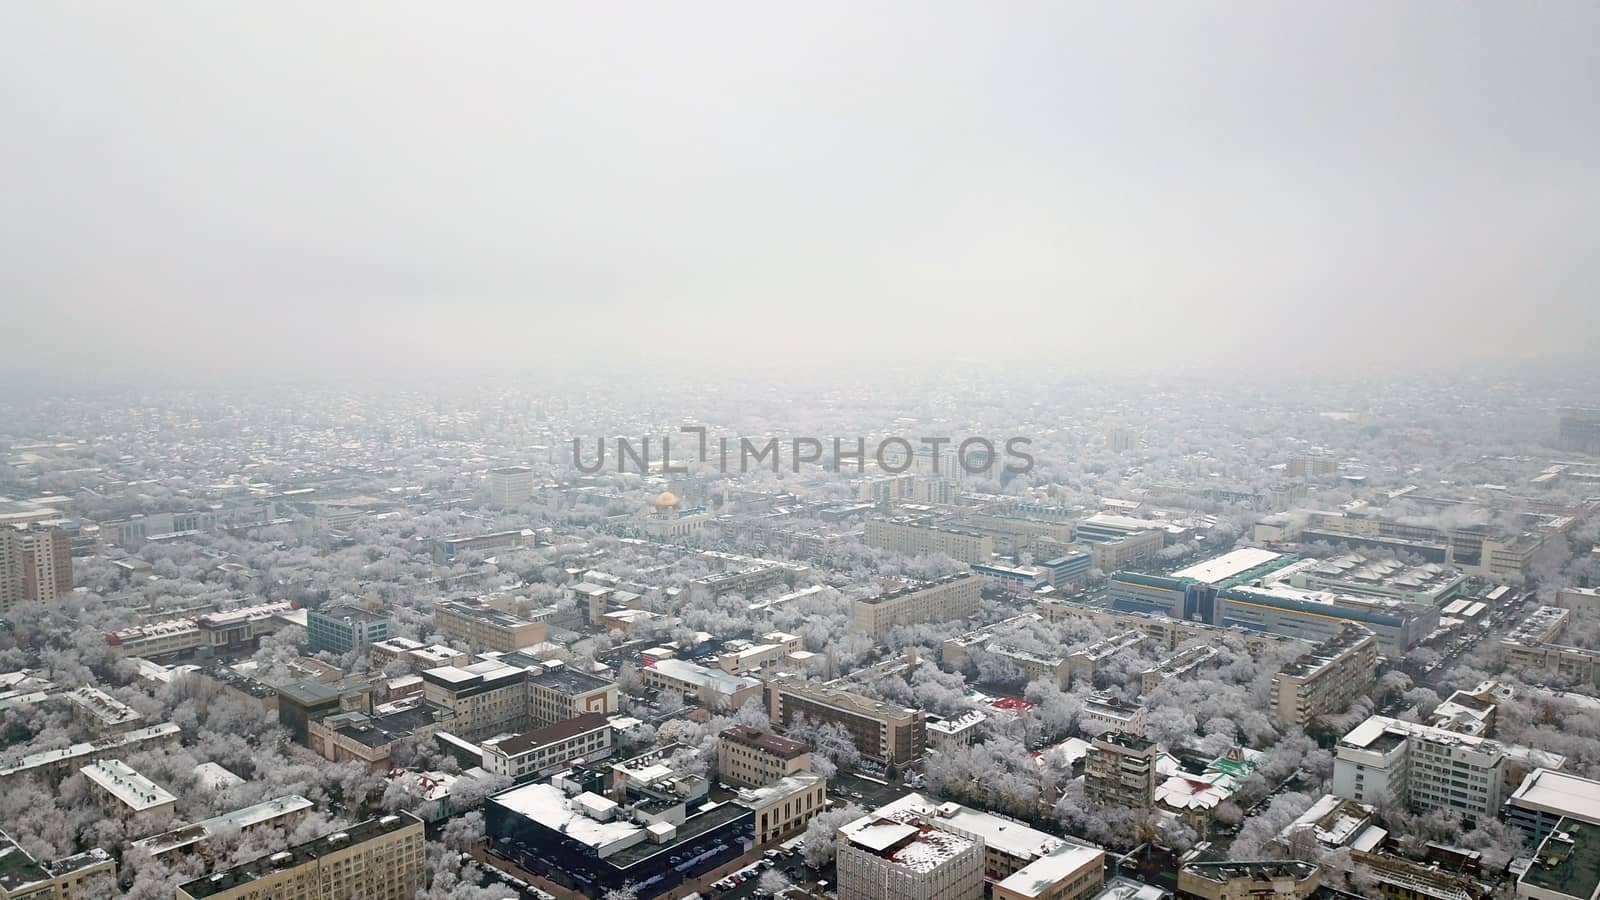 Top view through the clouds on the city of Almaty. Winter atmosphere, white trees, bushes, roofs of houses. Flying over the city. White clouds and light fog. Traffic of cars on roads. Through clouds.